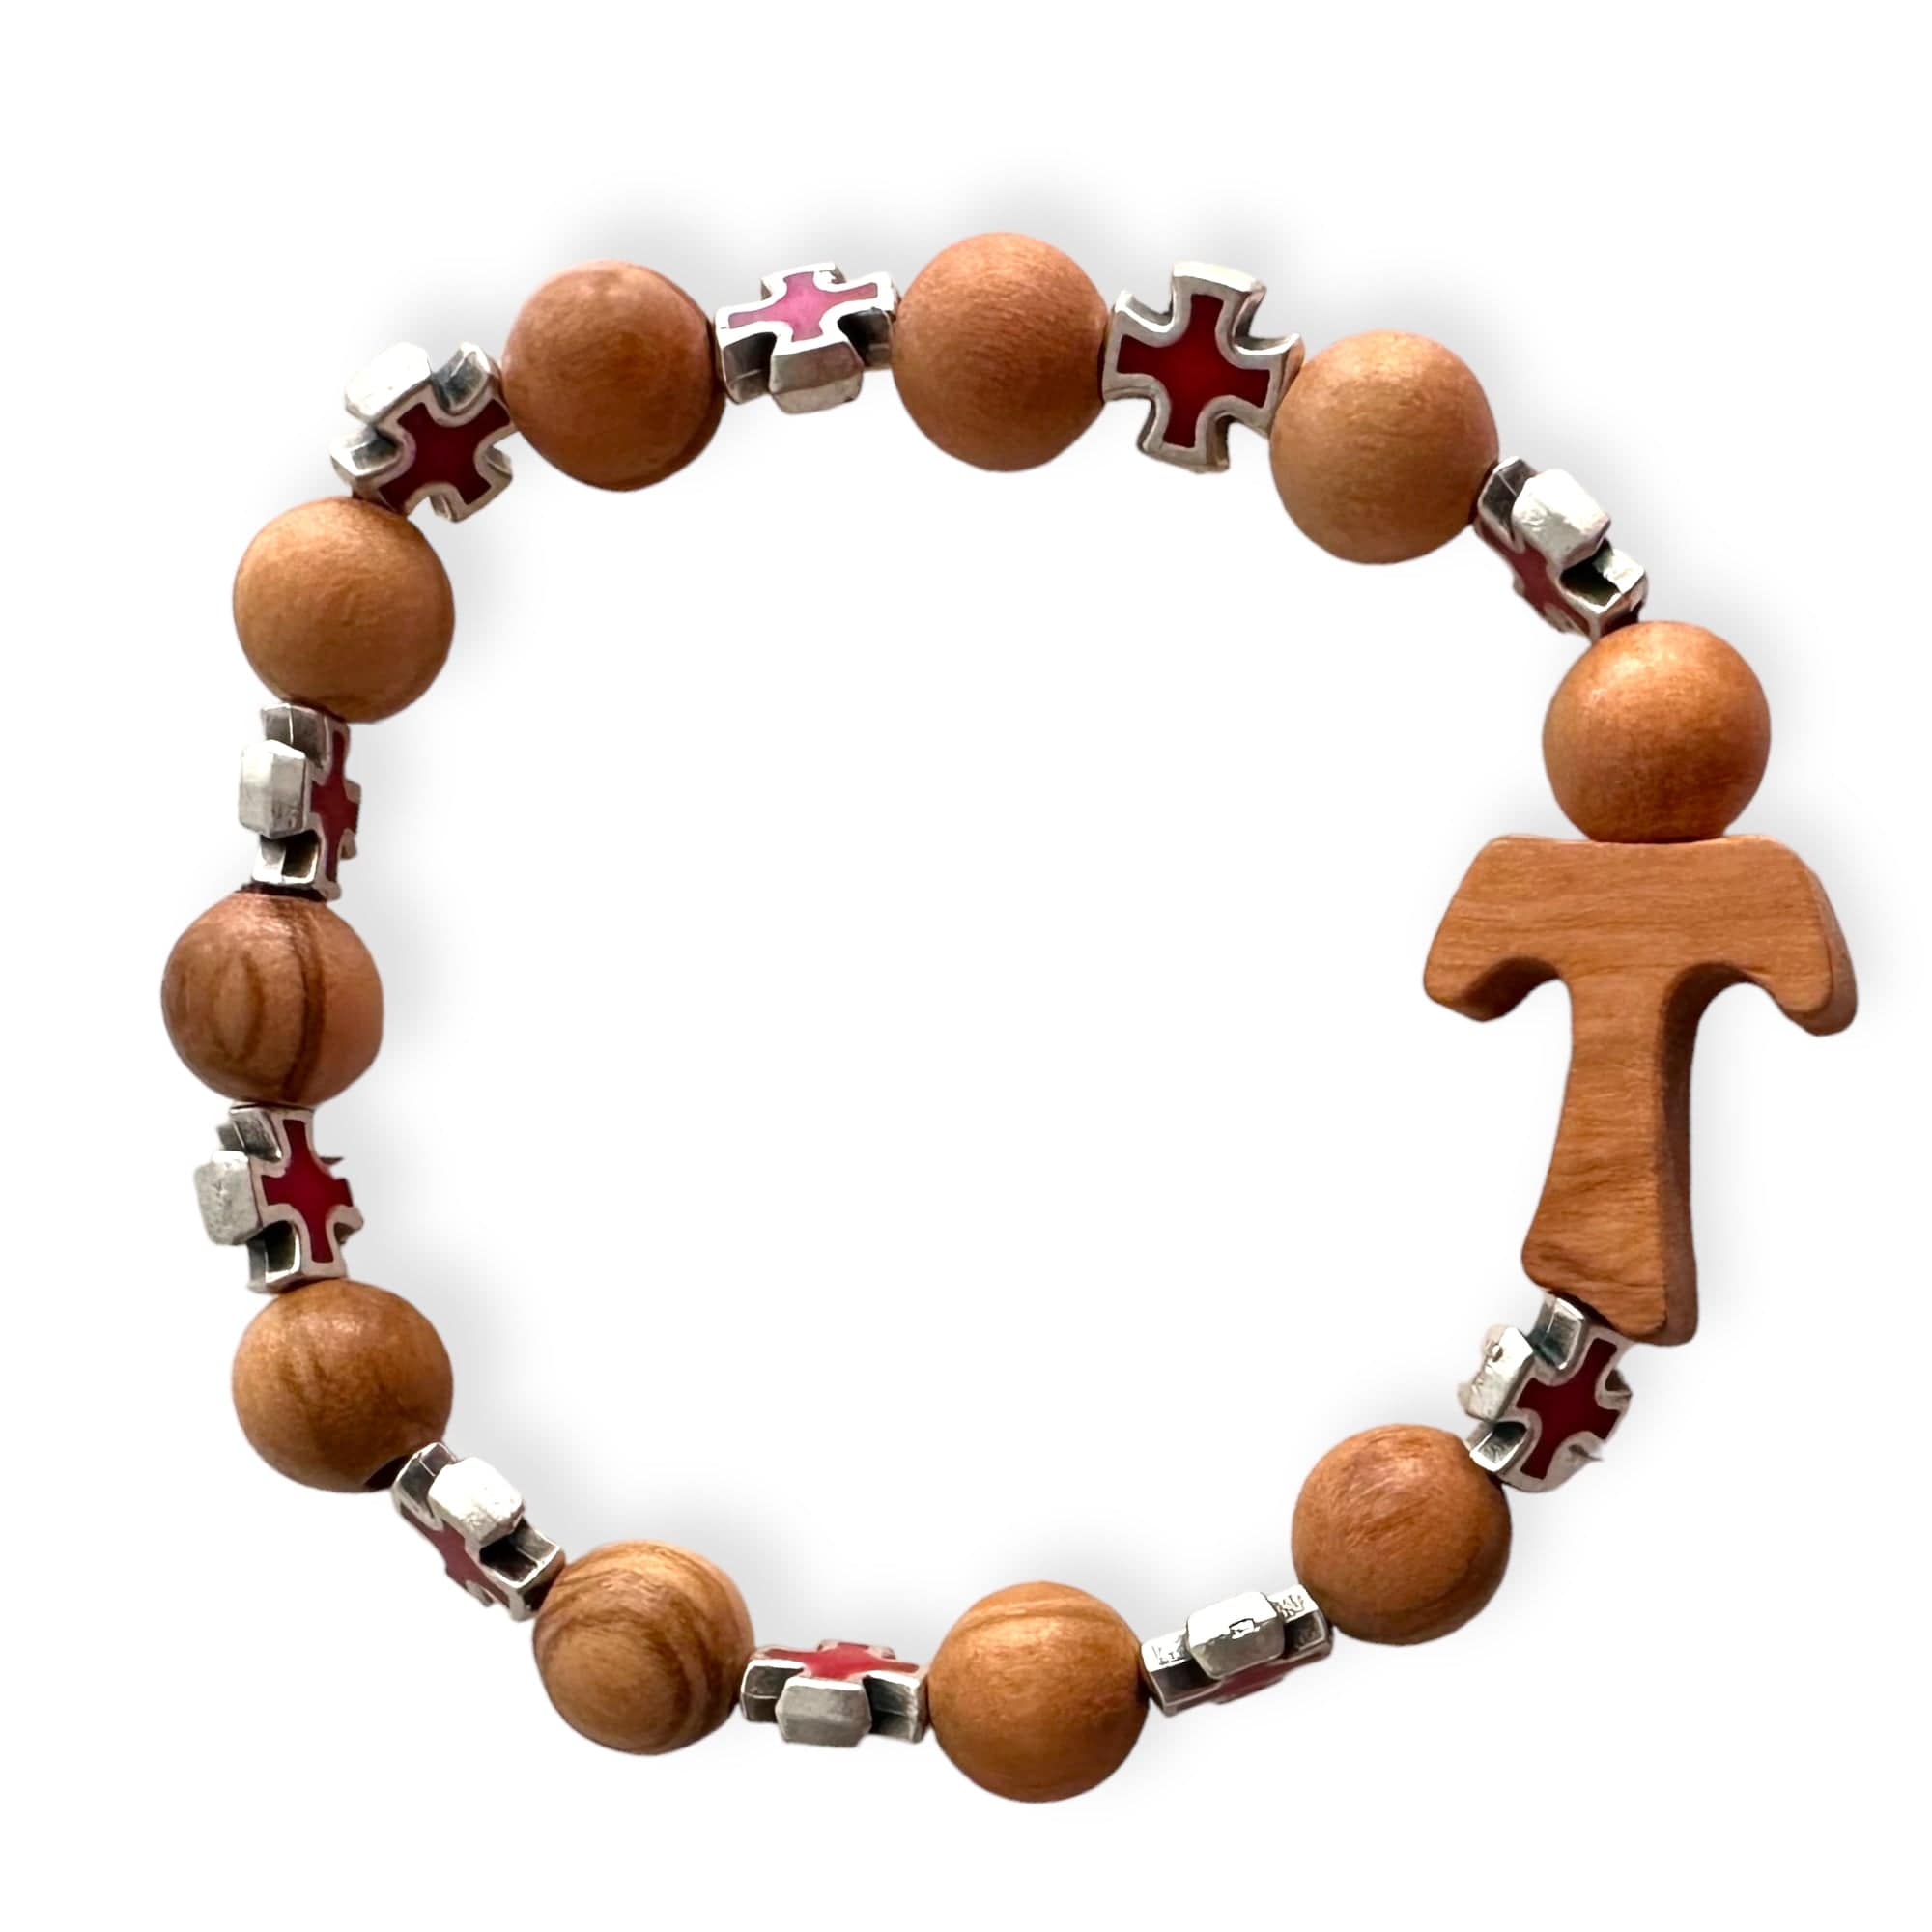 Our Lady of Guadalupe Decade Rosary Wooden Catholic Religious Bracelet -  Made in Brazil - Walmart.com